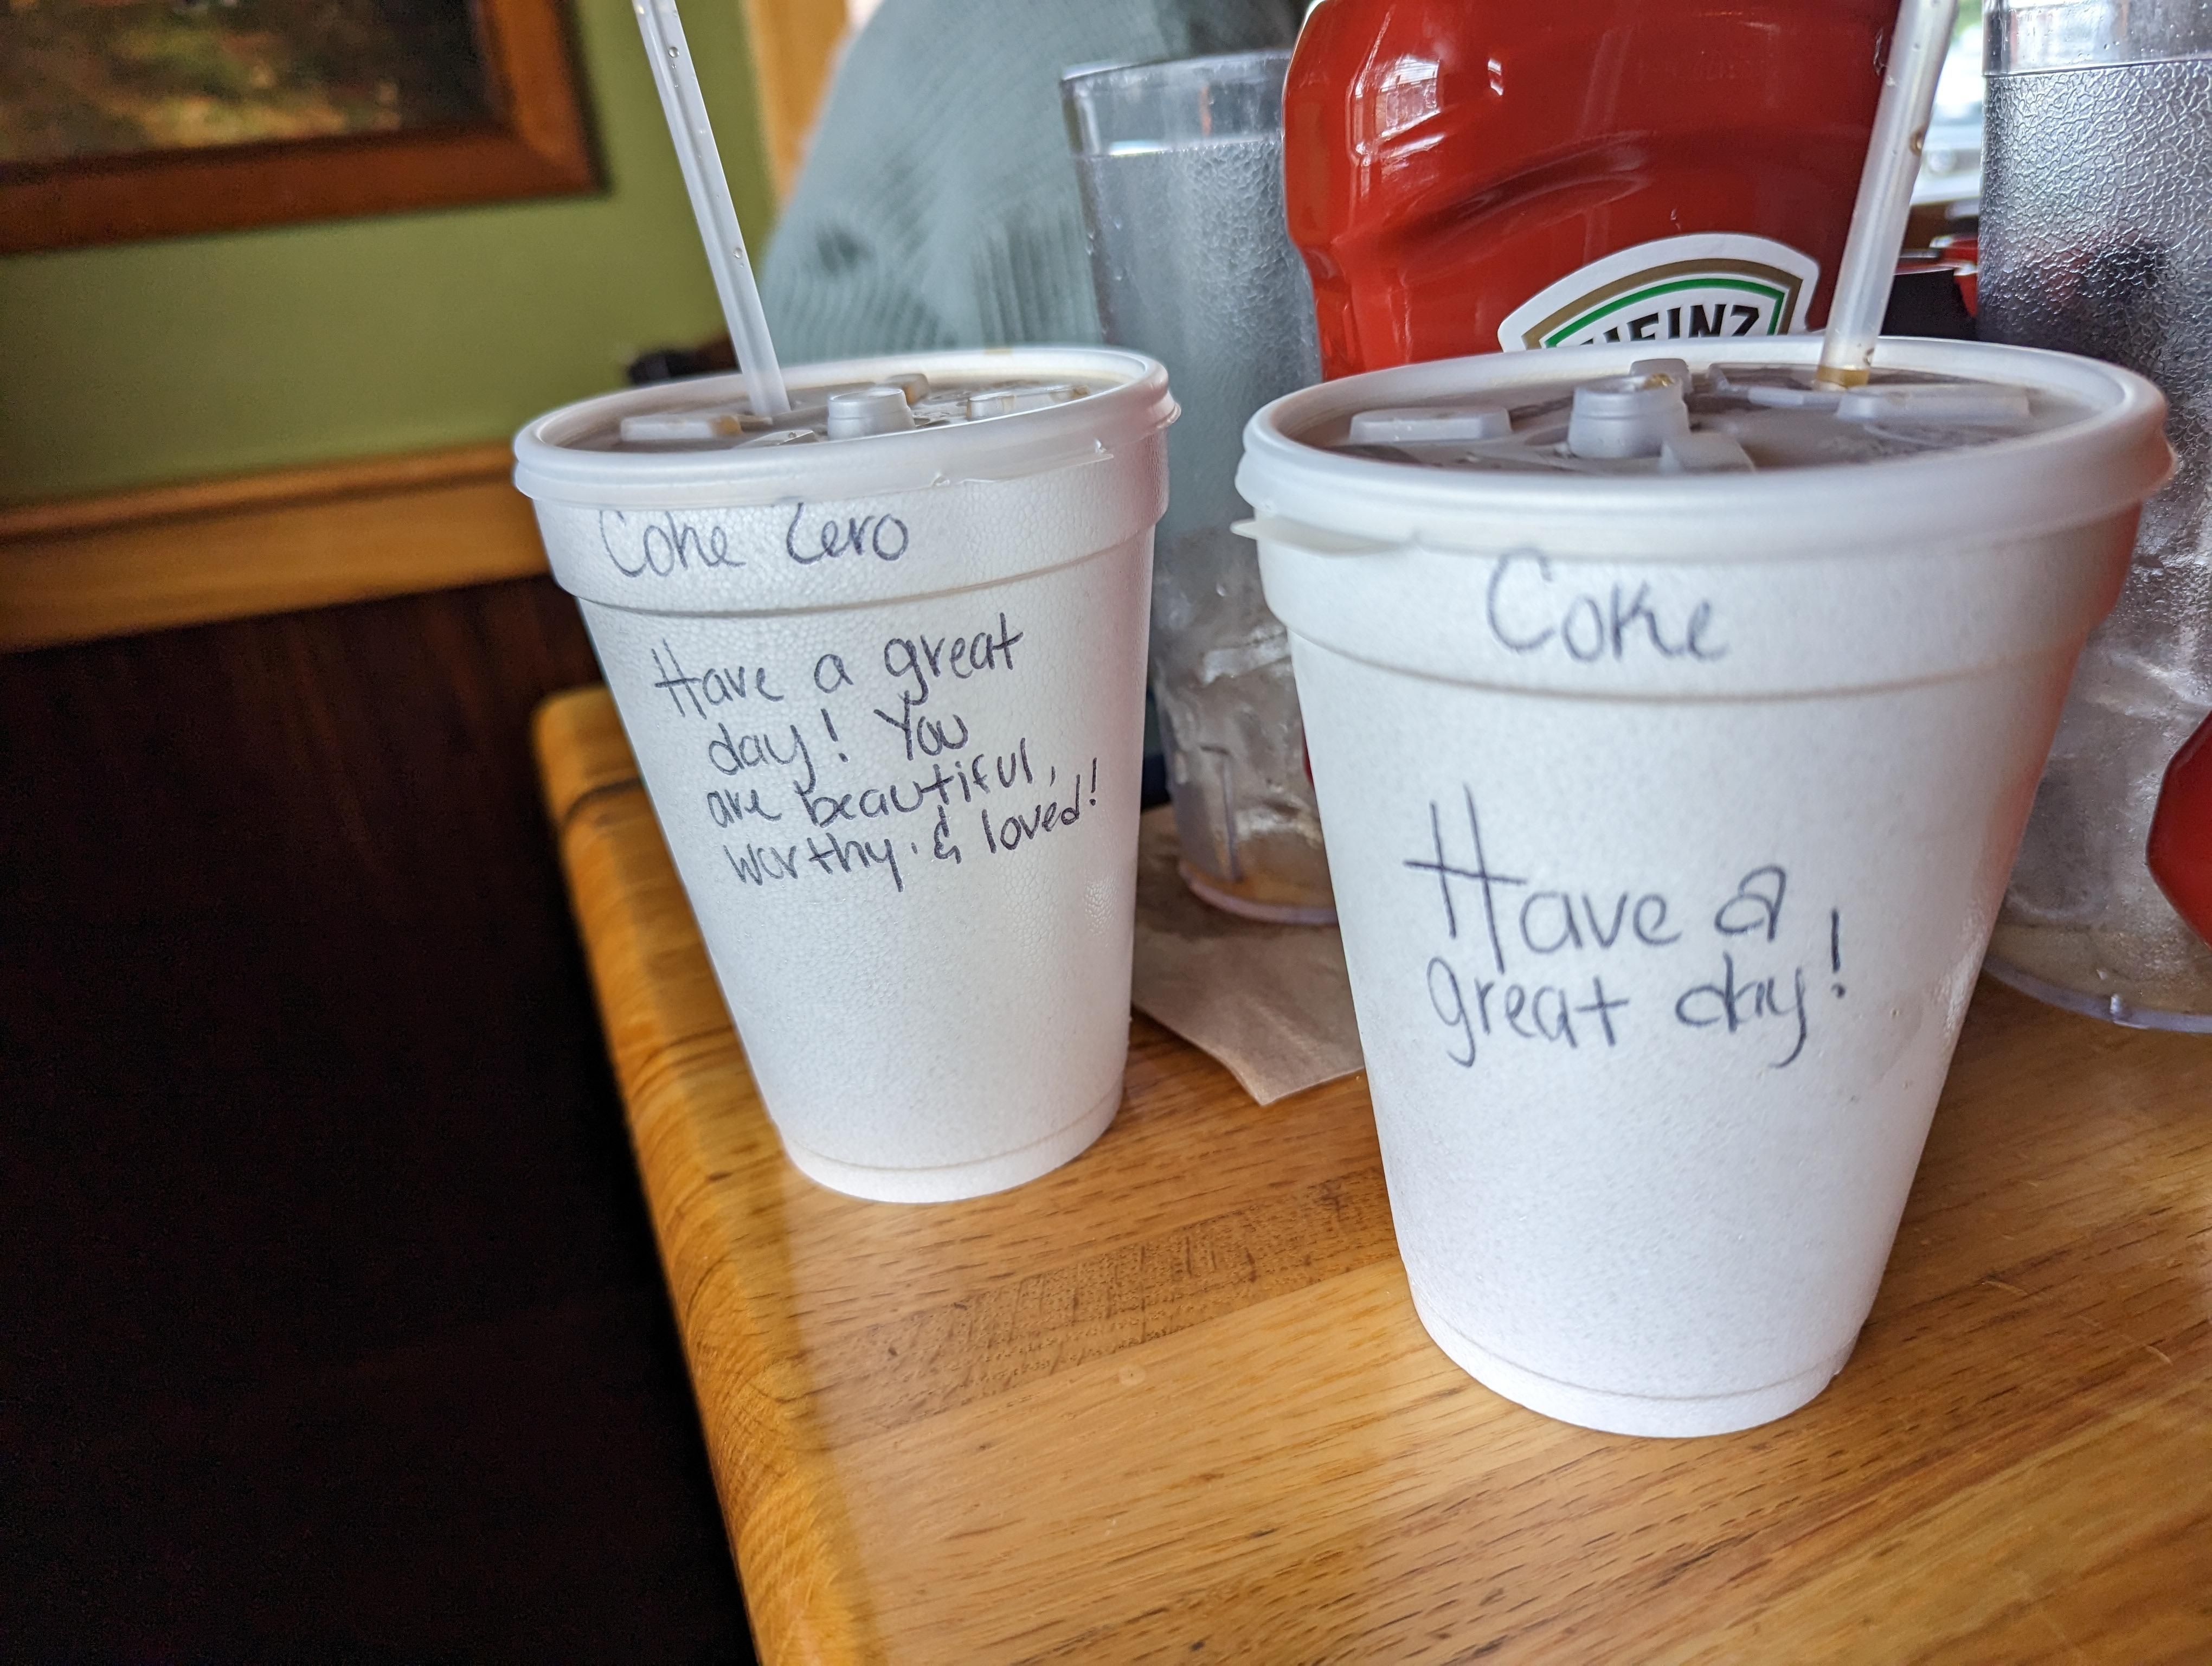 Waitress left kind messages on our drinks. Feel like mine's missing something...